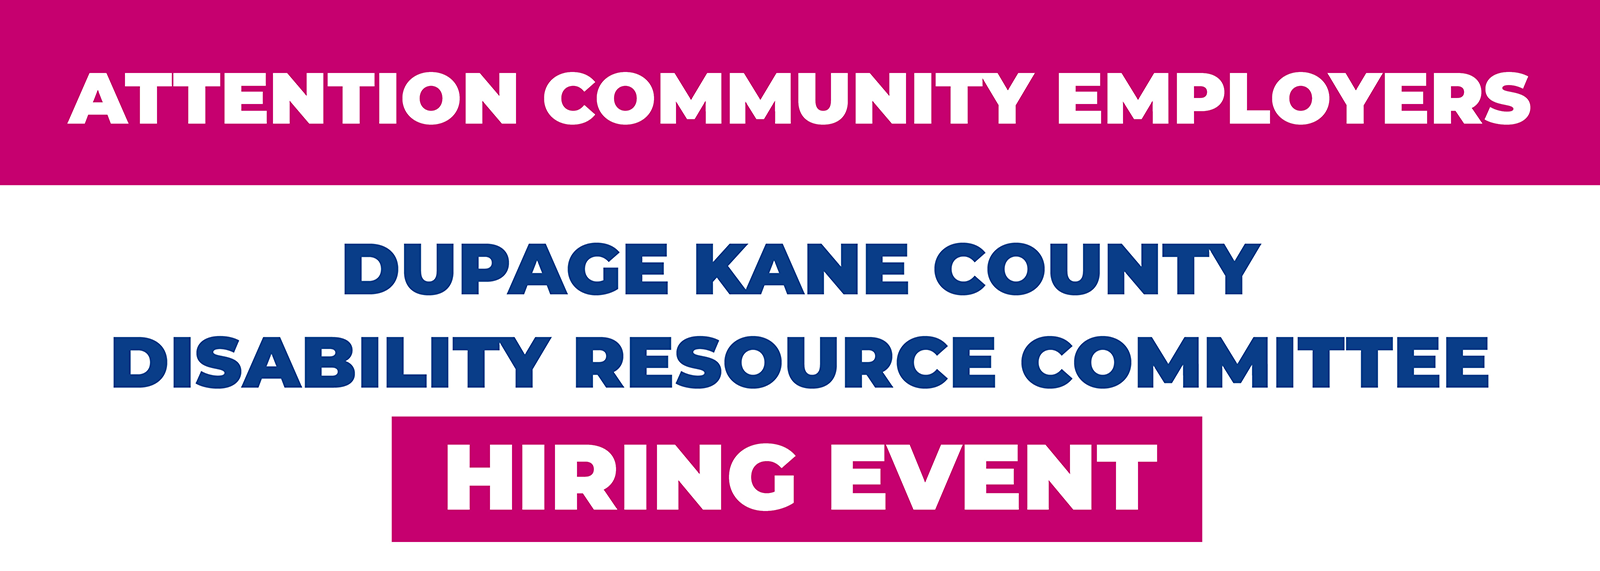 Attention Community Employers: DuPage Kane County Disability Resource Committee Hiring Event